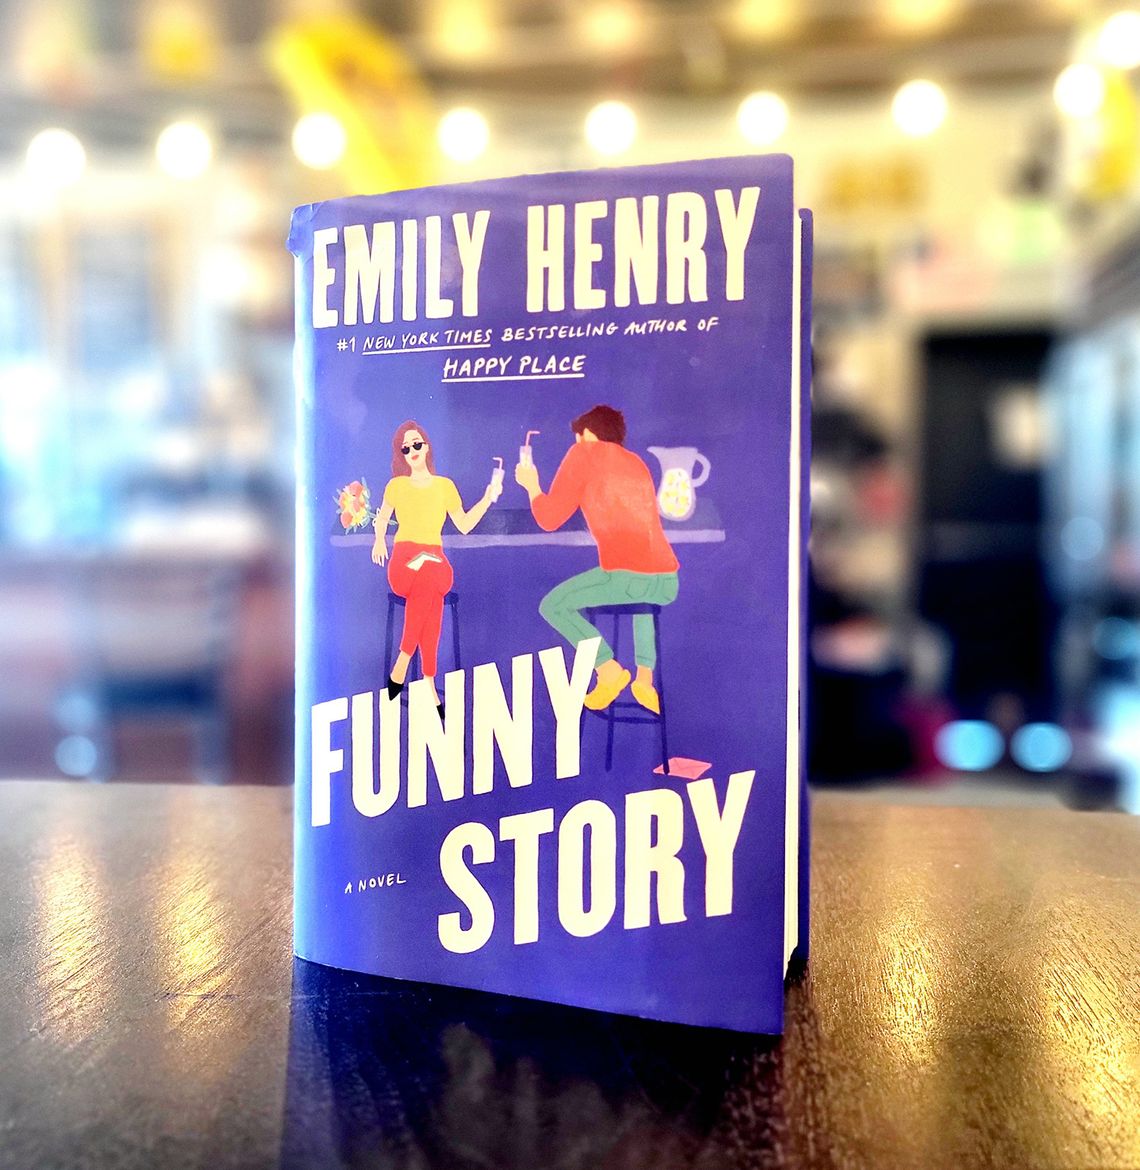 Allison’s Book Report – “Funny Story” by Emily Henry